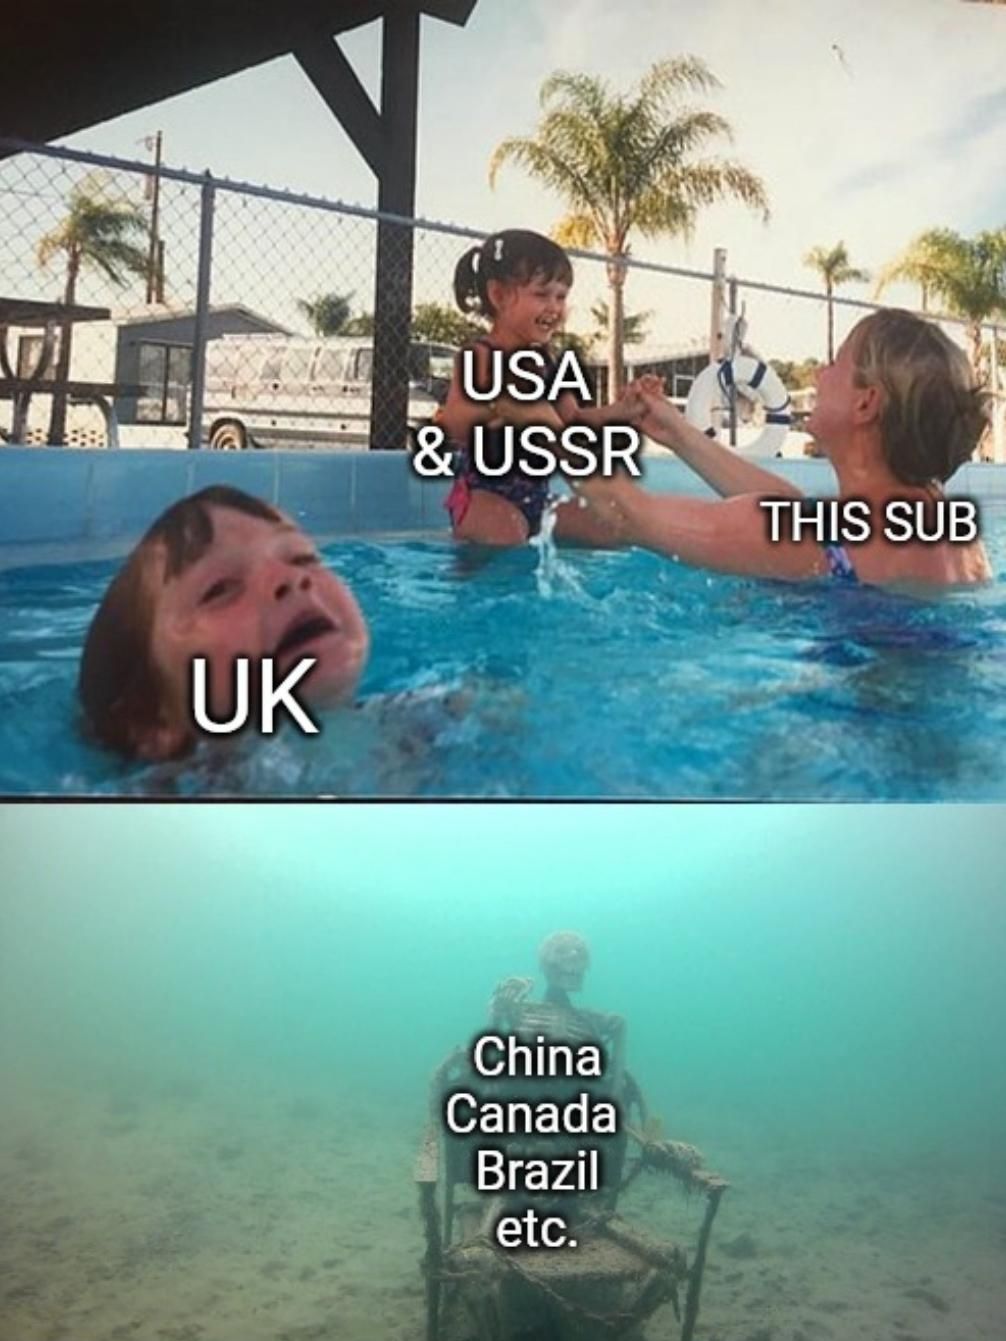 When ww2 is discussed